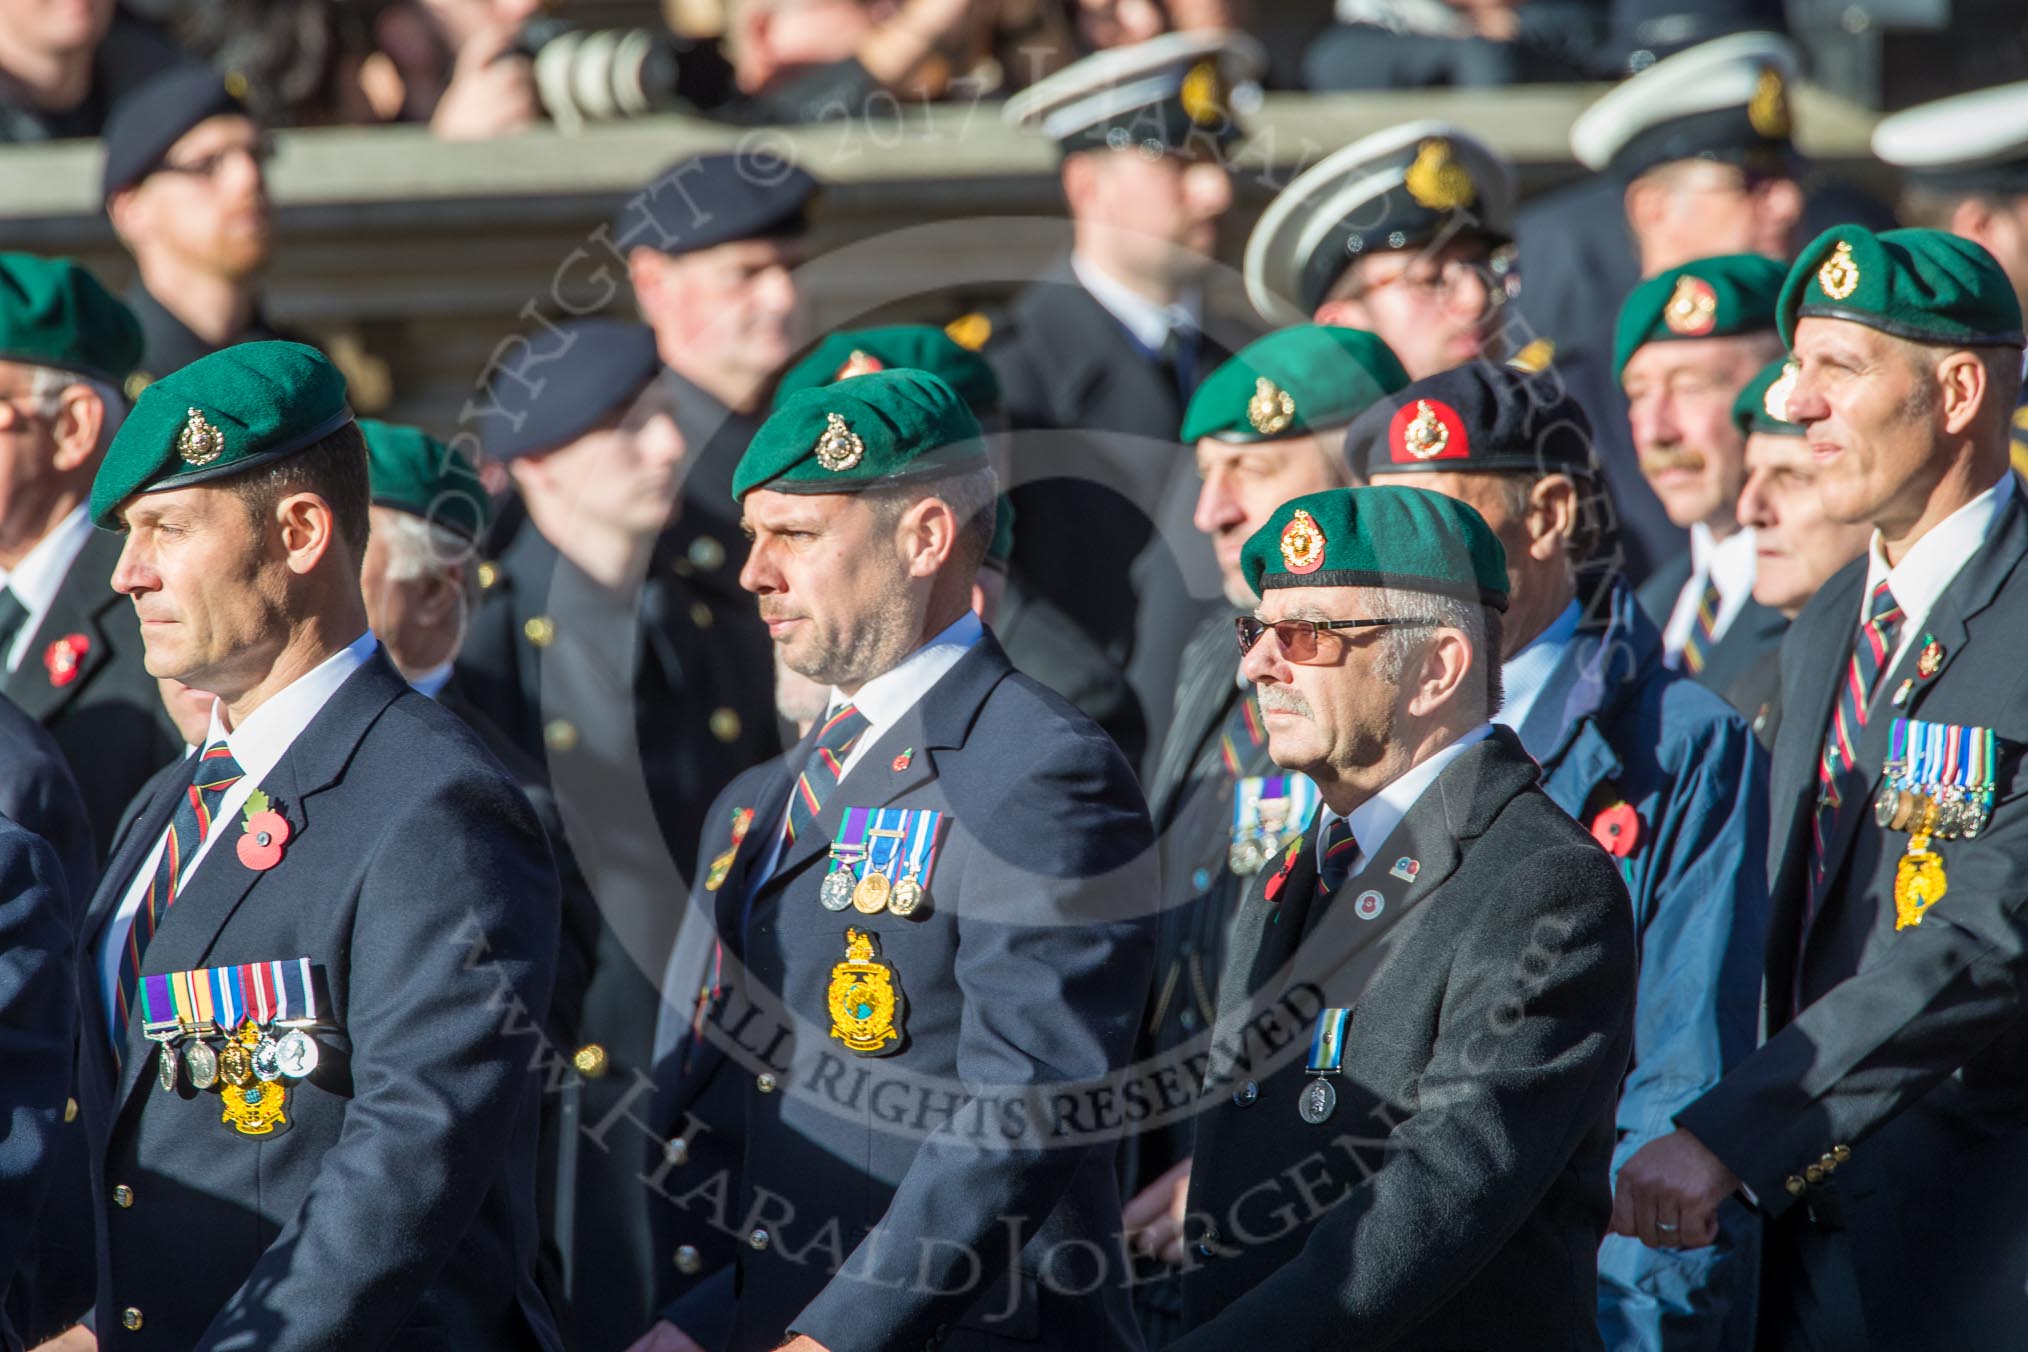 The Royal Marines Association  (Group E2, 59 members) during the Royal British Legion March Past on Remembrance Sunday at the Cenotaph, Whitehall, Westminster, London, 11 November 2018, 11:41.